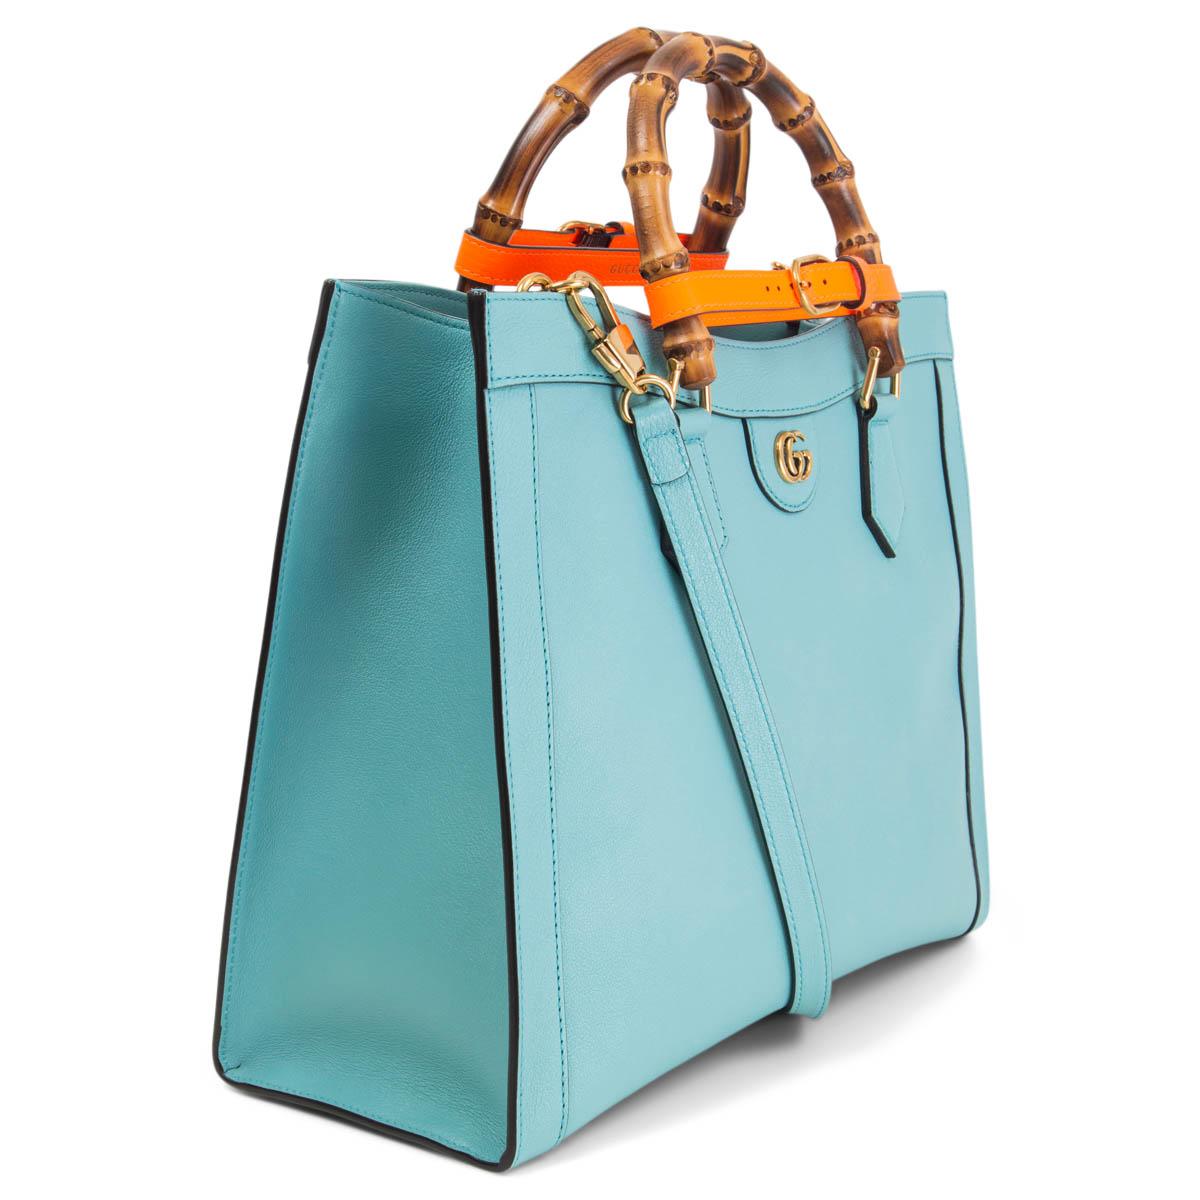 100% authentic Gucci Diana Medium Tote Bag in light blue calfskin, combining recognizable elements of the House, the small tote bag is defined by its bamboo handles and gold-tone Double G hardware. The bag is further accentuated by two orange neon